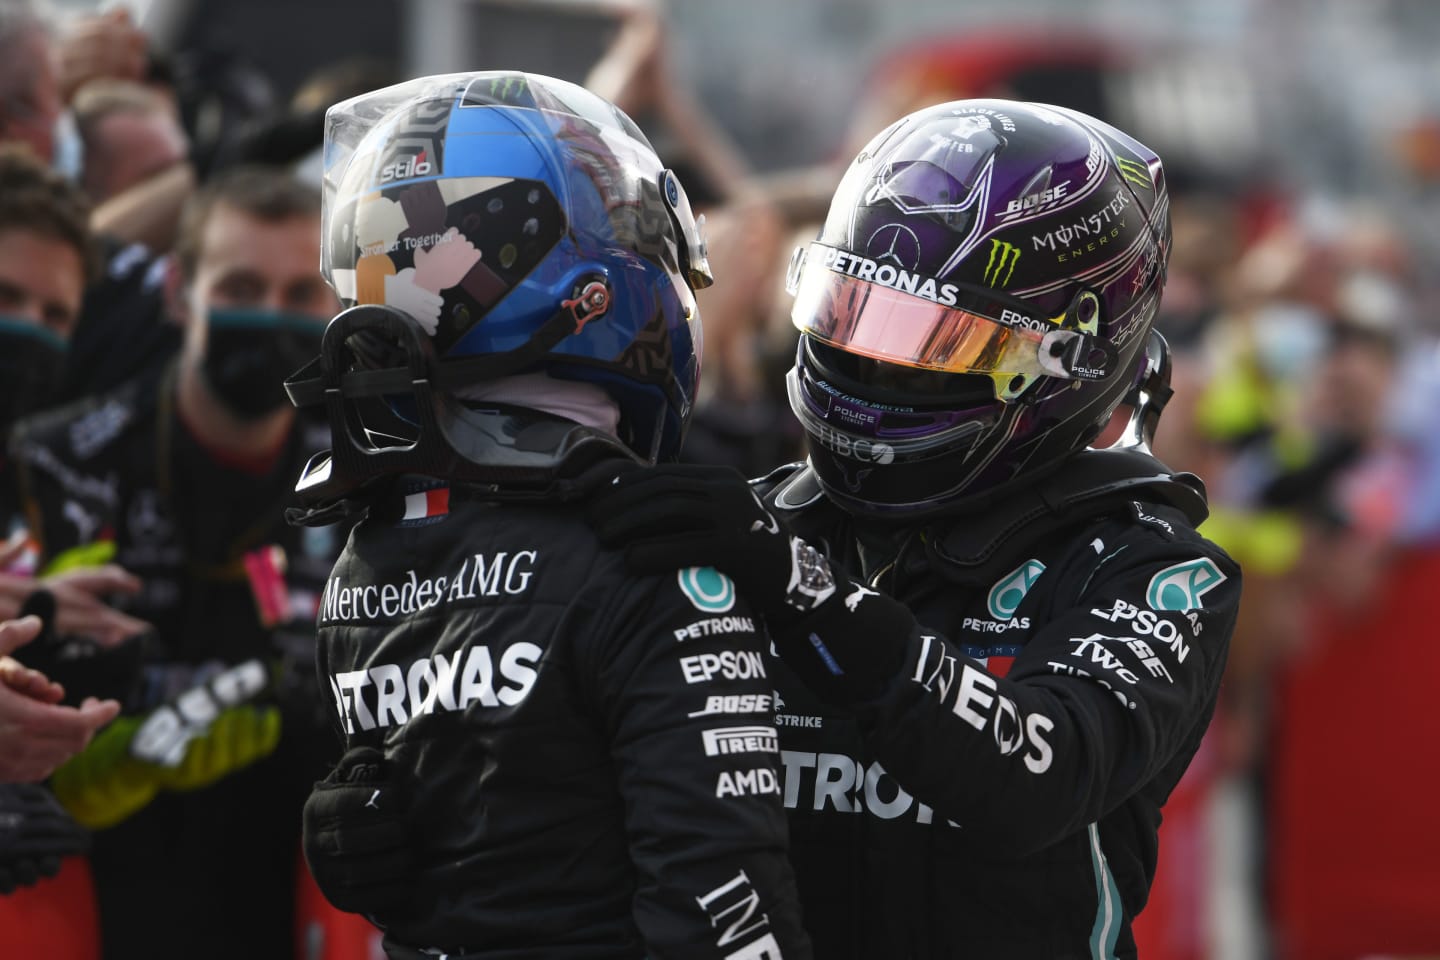 IMOLA, ITALY - NOVEMBER 01: Race winner Lewis Hamilton of Great Britain and Mercedes GP (R) embraces teammate and second placed Valtteri Bottas of Finland and Mercedes GP (L) in parc ferme during the F1 Grand Prix of Emilia Romagna at Autodromo Enzo e Dino Ferrari on November 01, 2020 in Imola, Italy. (Photo by Rudy Carezzevoli/Getty Images)